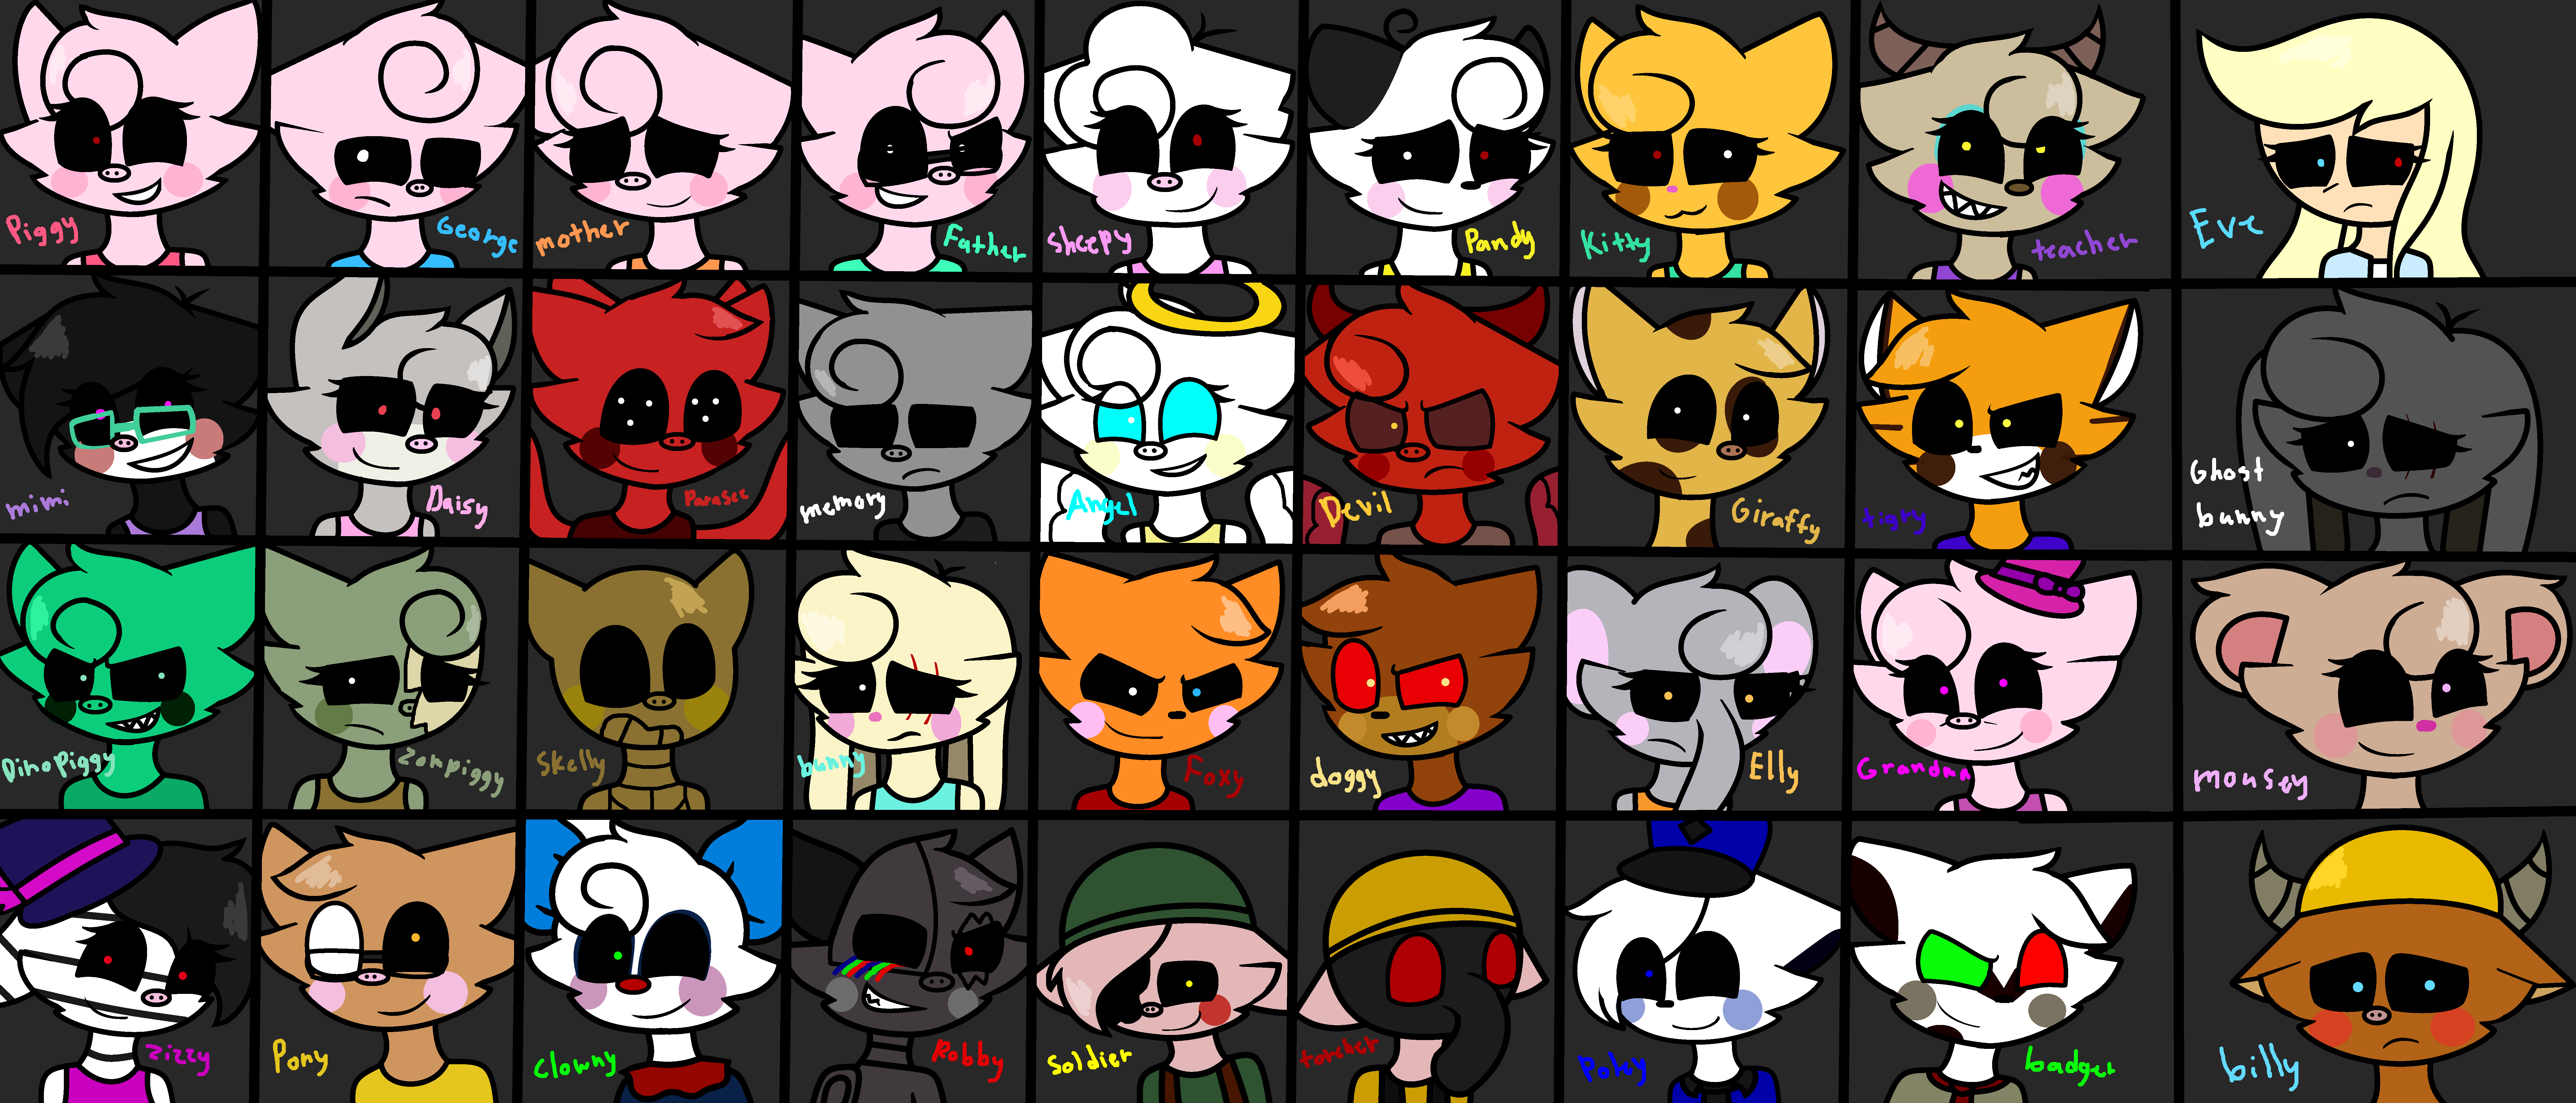 All Piggy Skins By Xxxfroxyxx On Deviantart - piggy pictures roblox all characters